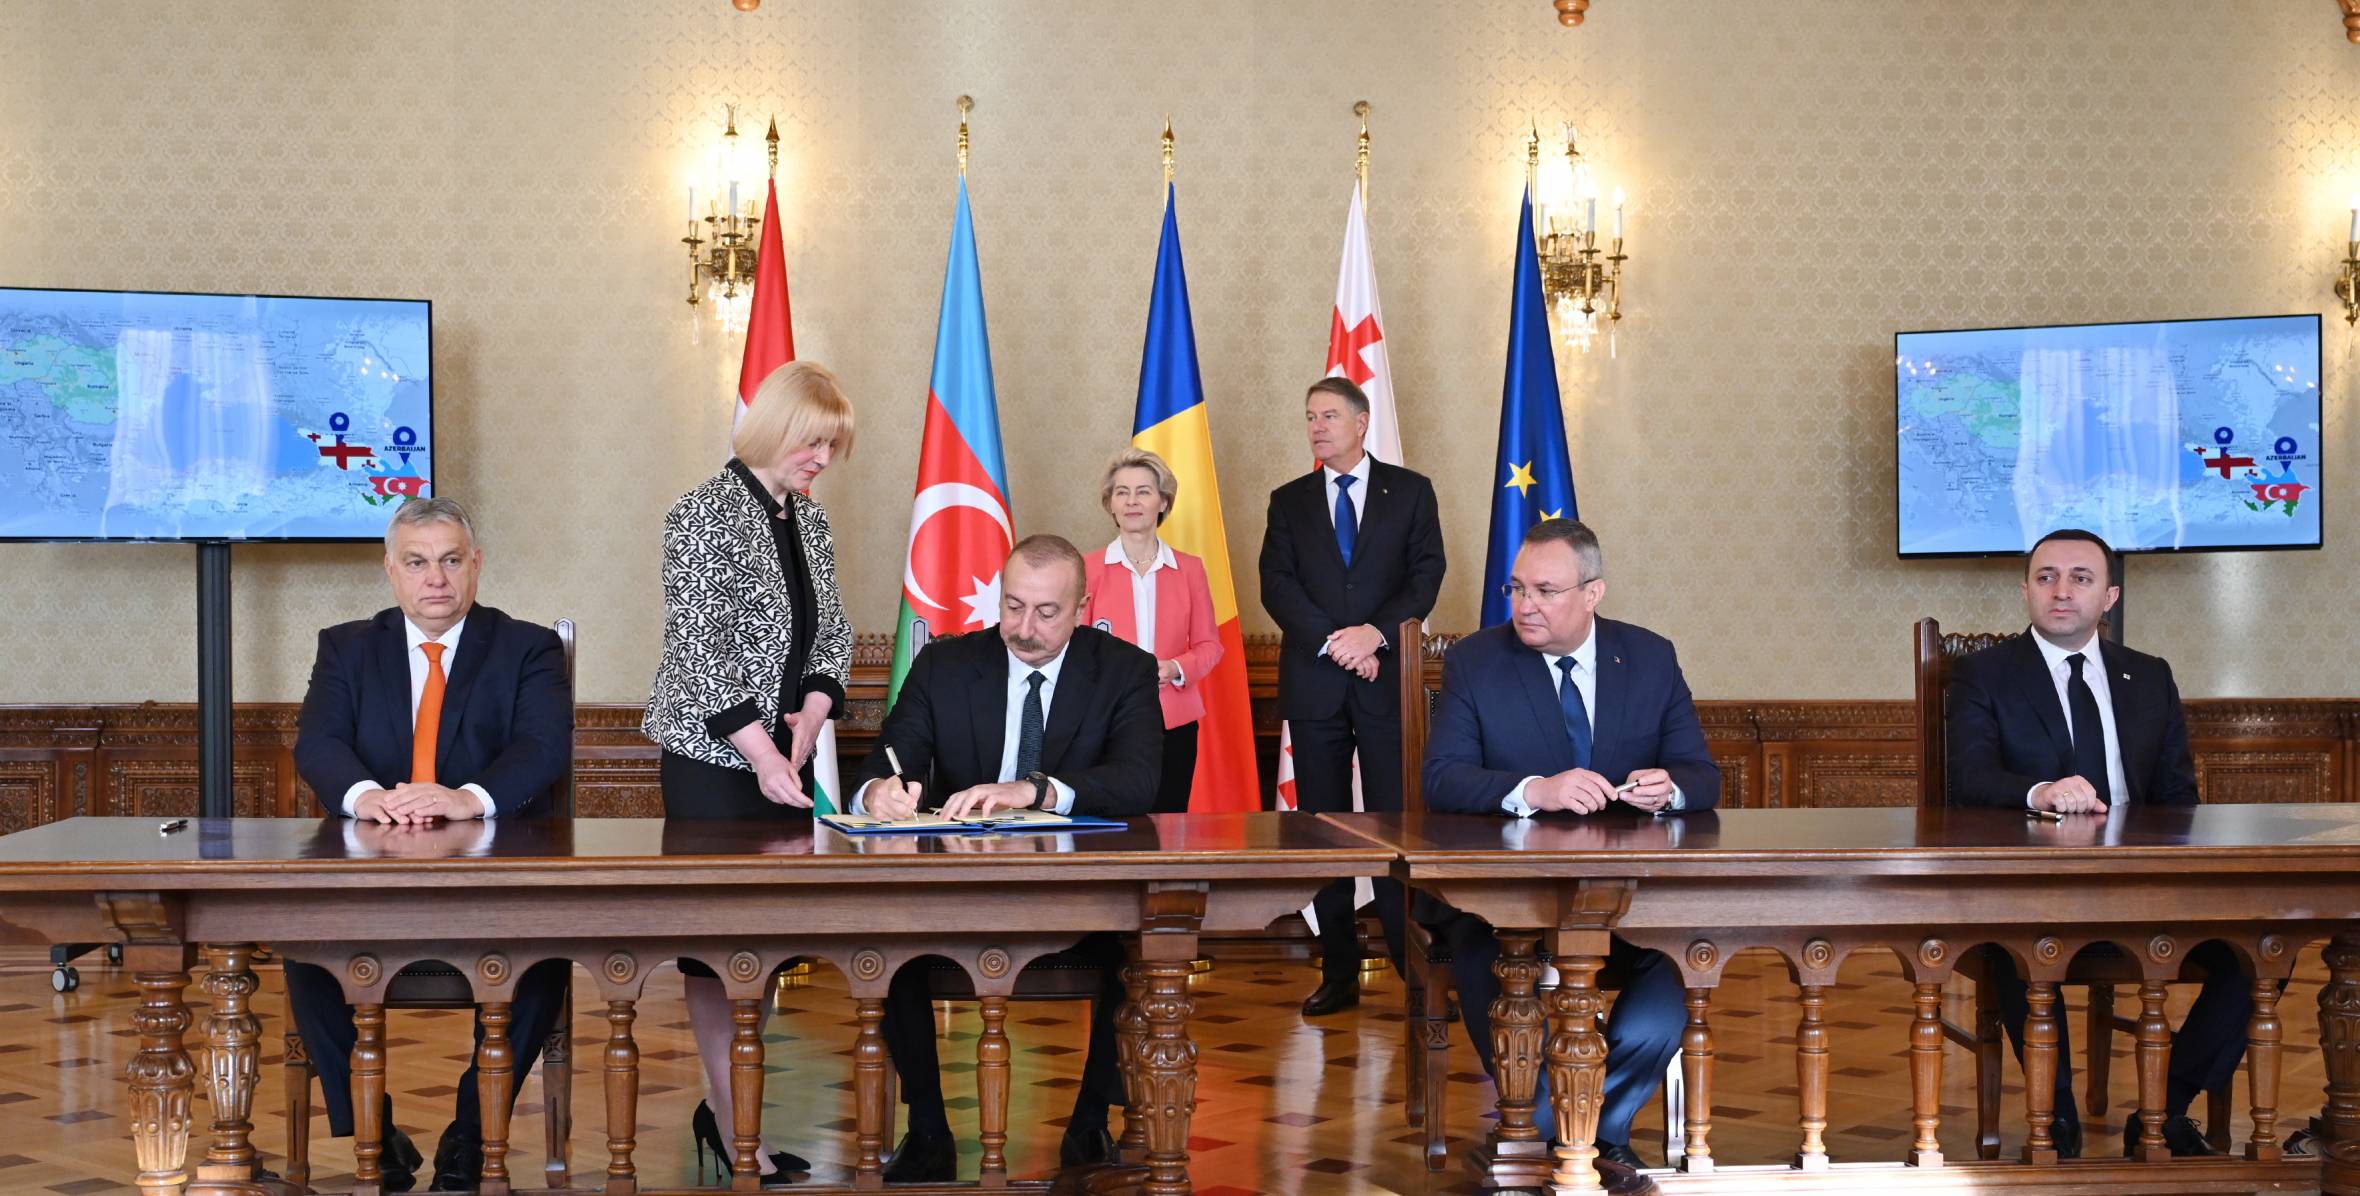 Governments of Azerbaijan, Georgia, Romania and Hungary signed agreement on strategic partnership in the field of green energy in Bucharest